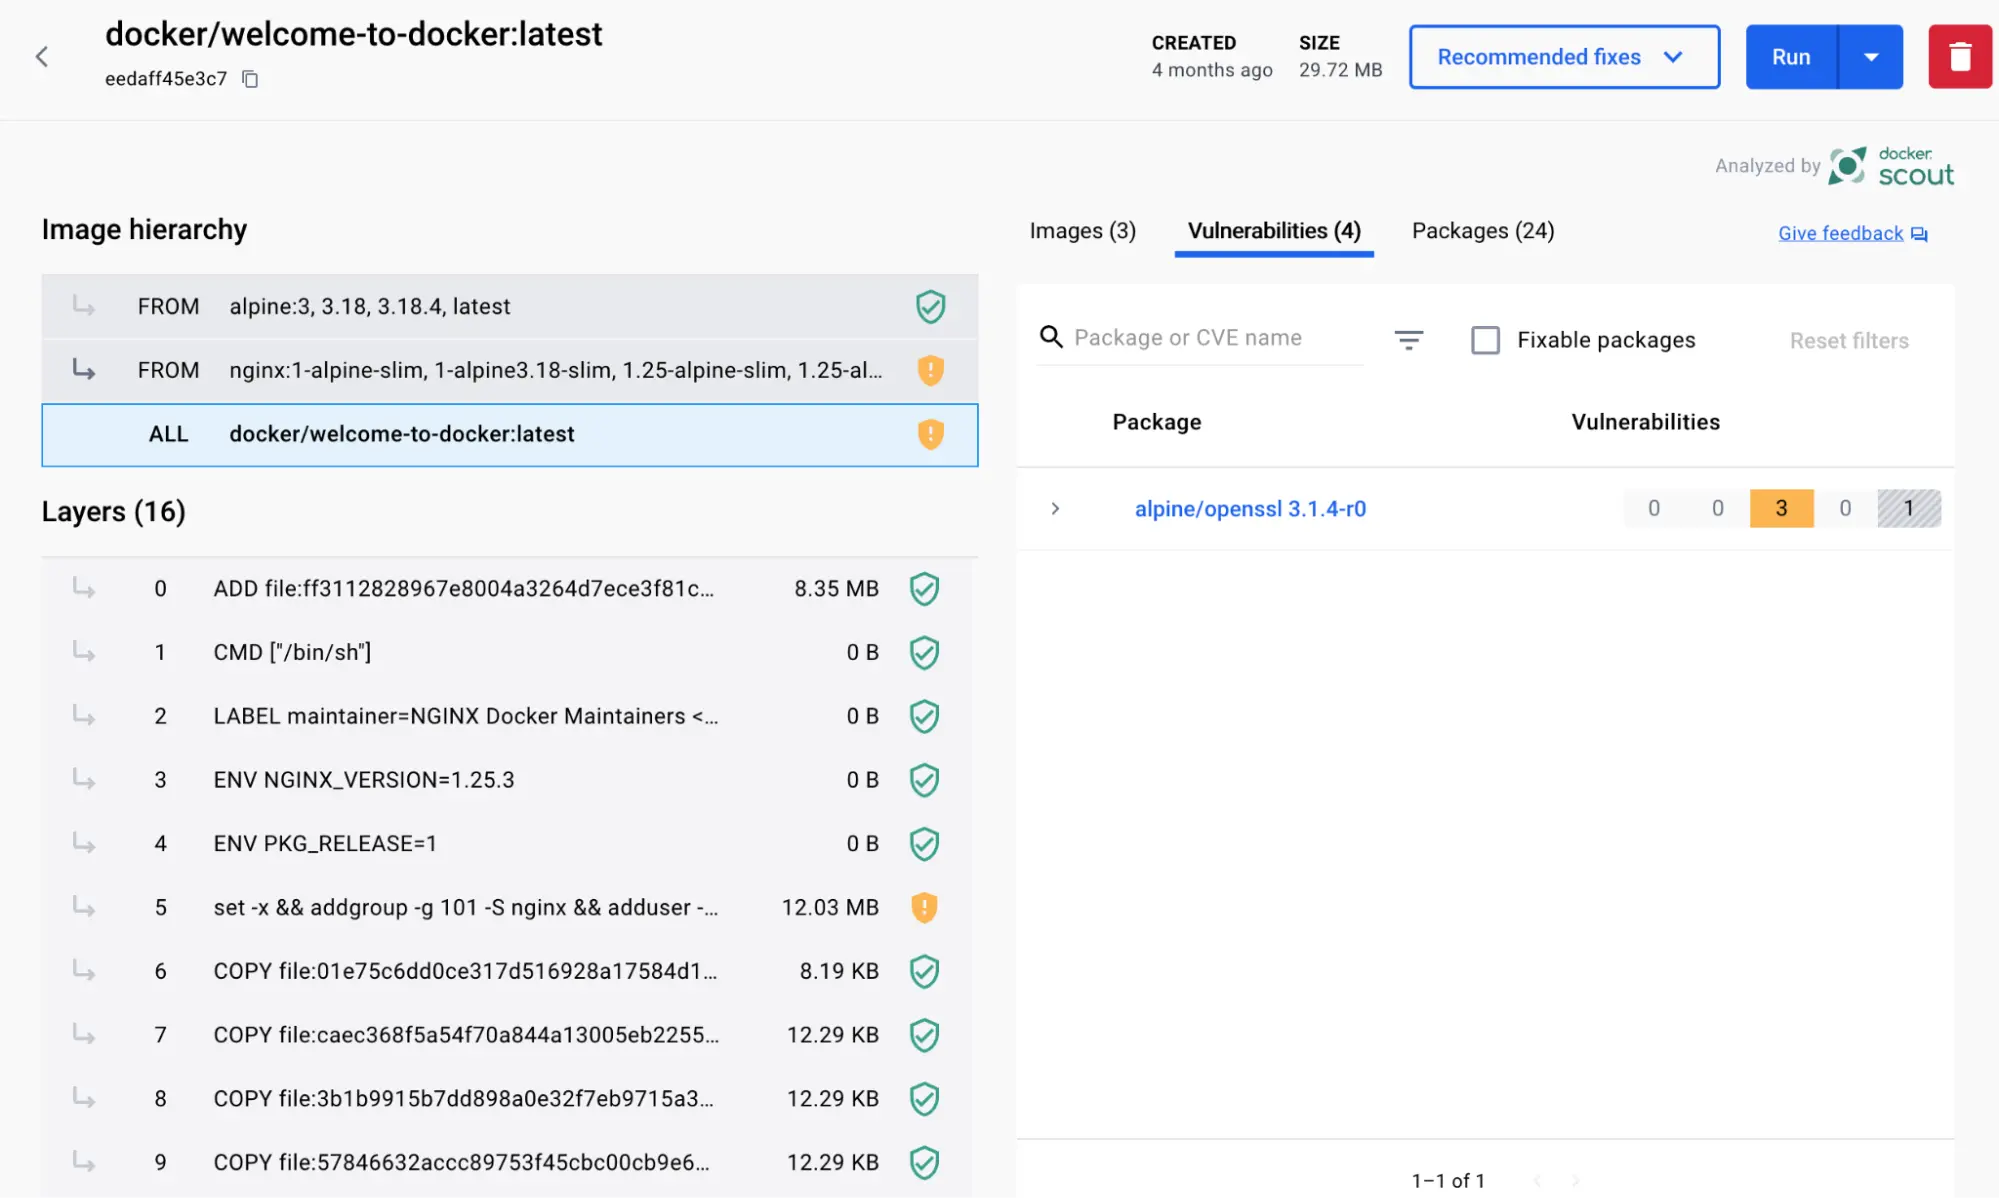 A screenshot of the image details view for the docker/welcome-to-docker image